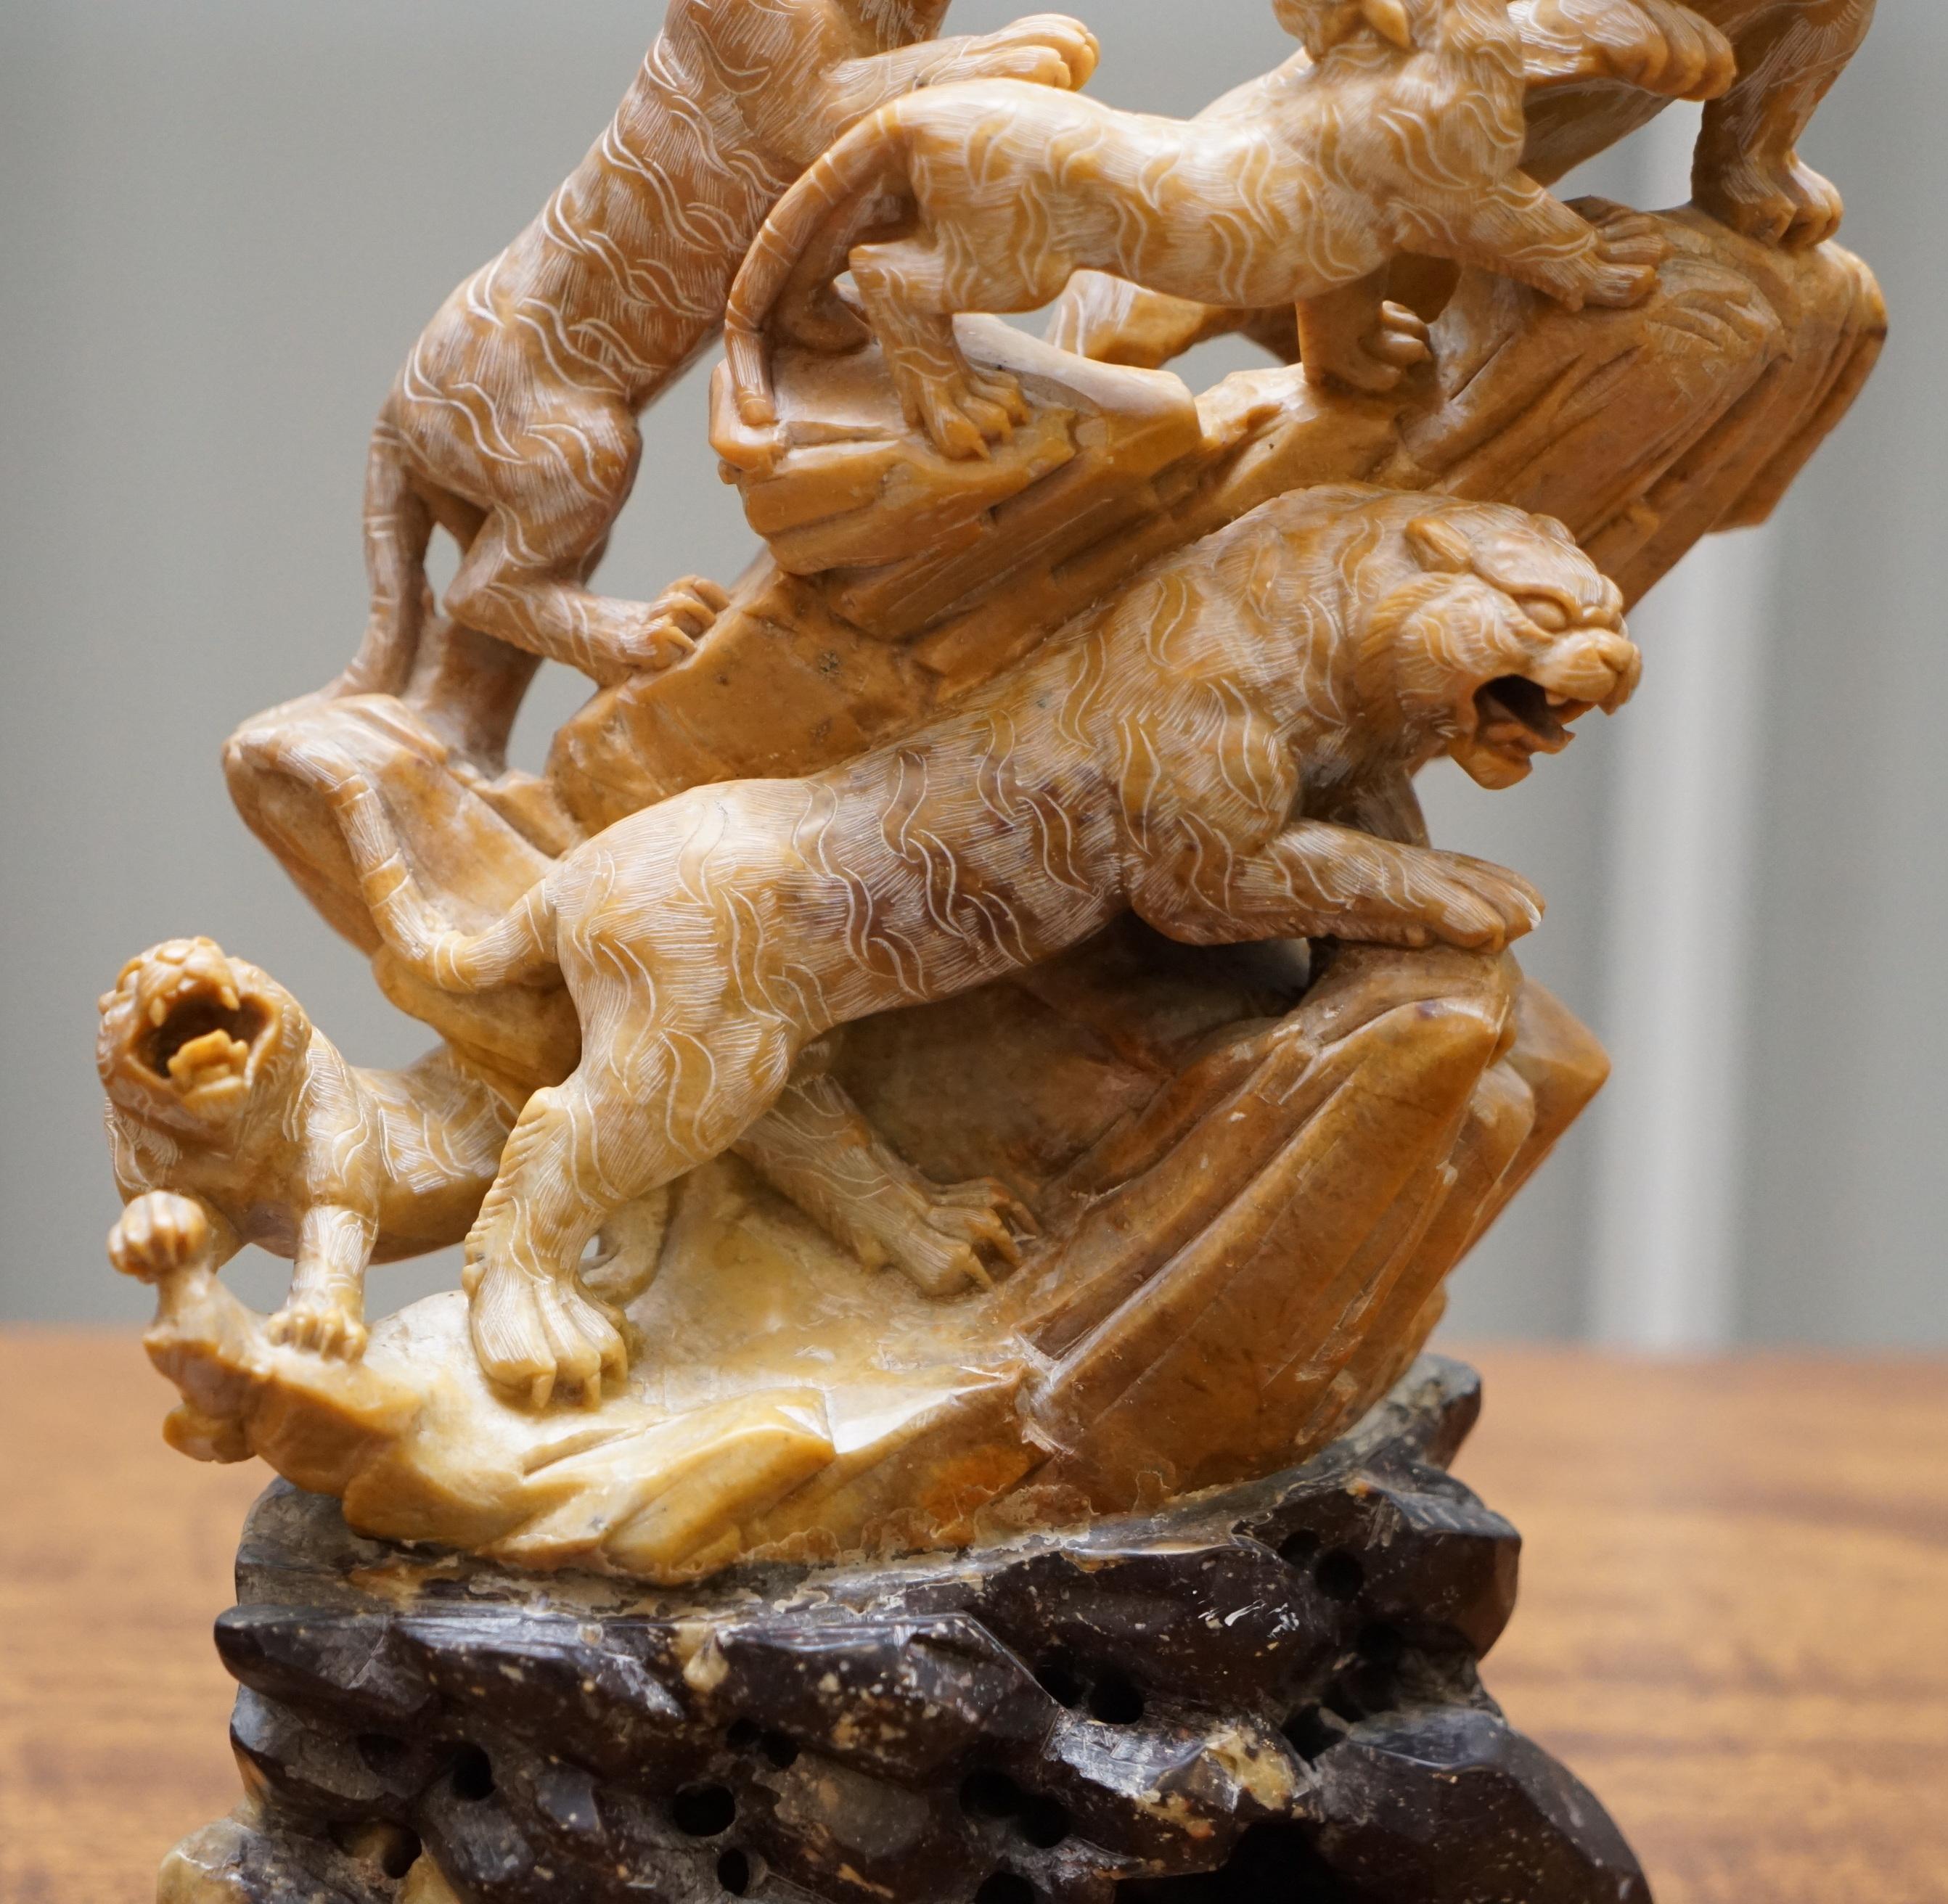 We are delighted to offer for sale this stunning and very rare original Chinese Export circa 1900 Shoushan stone carving of mountain lions on rocks

I have two Shoushan stone carvings, the other which is listed under my other items is an absolutely